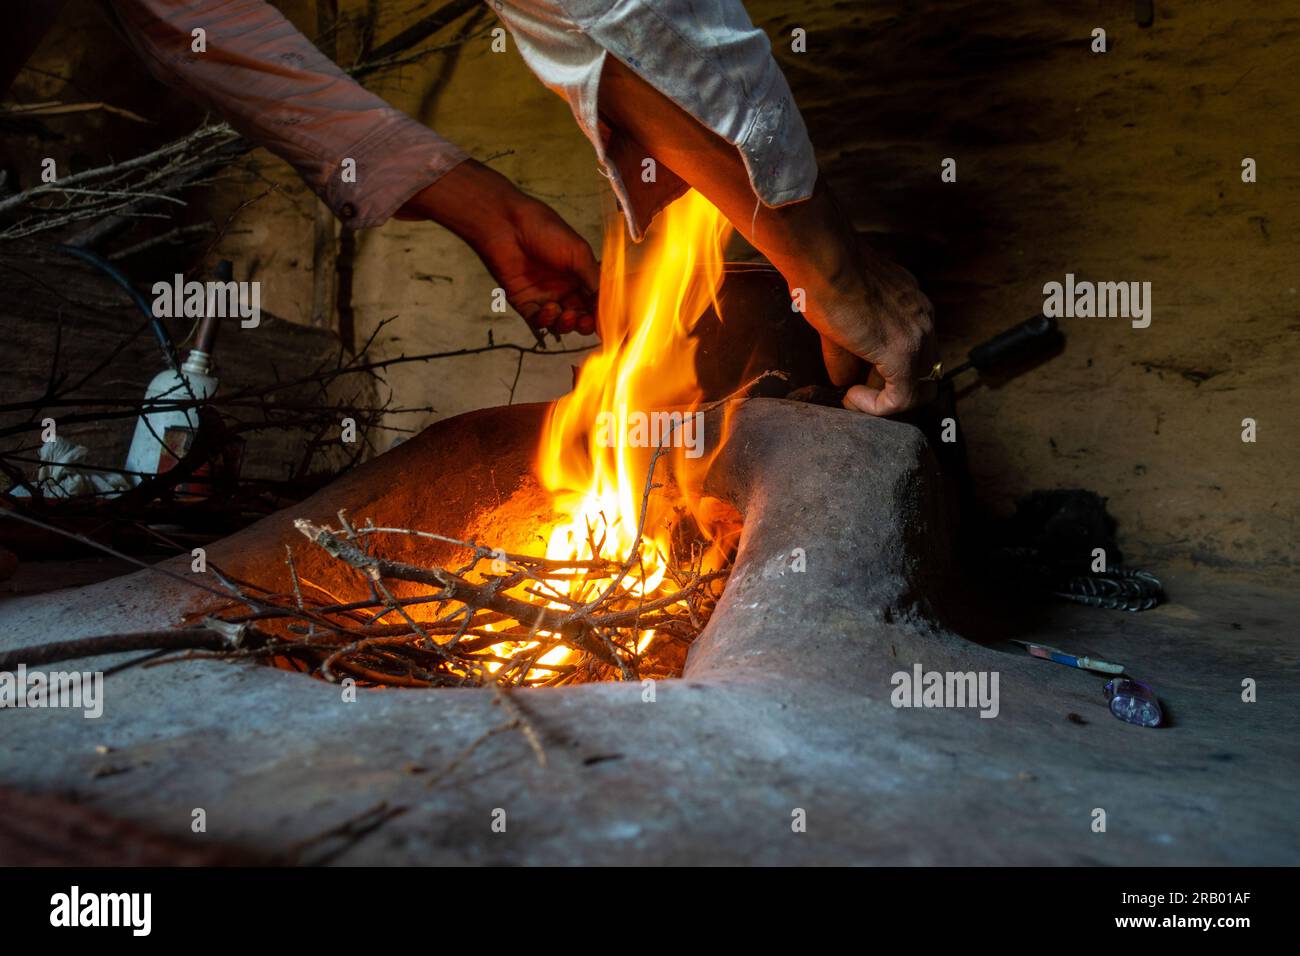 A burning clay stove fireplace inside a mud house in a rural village of Uttarakhand, India. Stock Photo